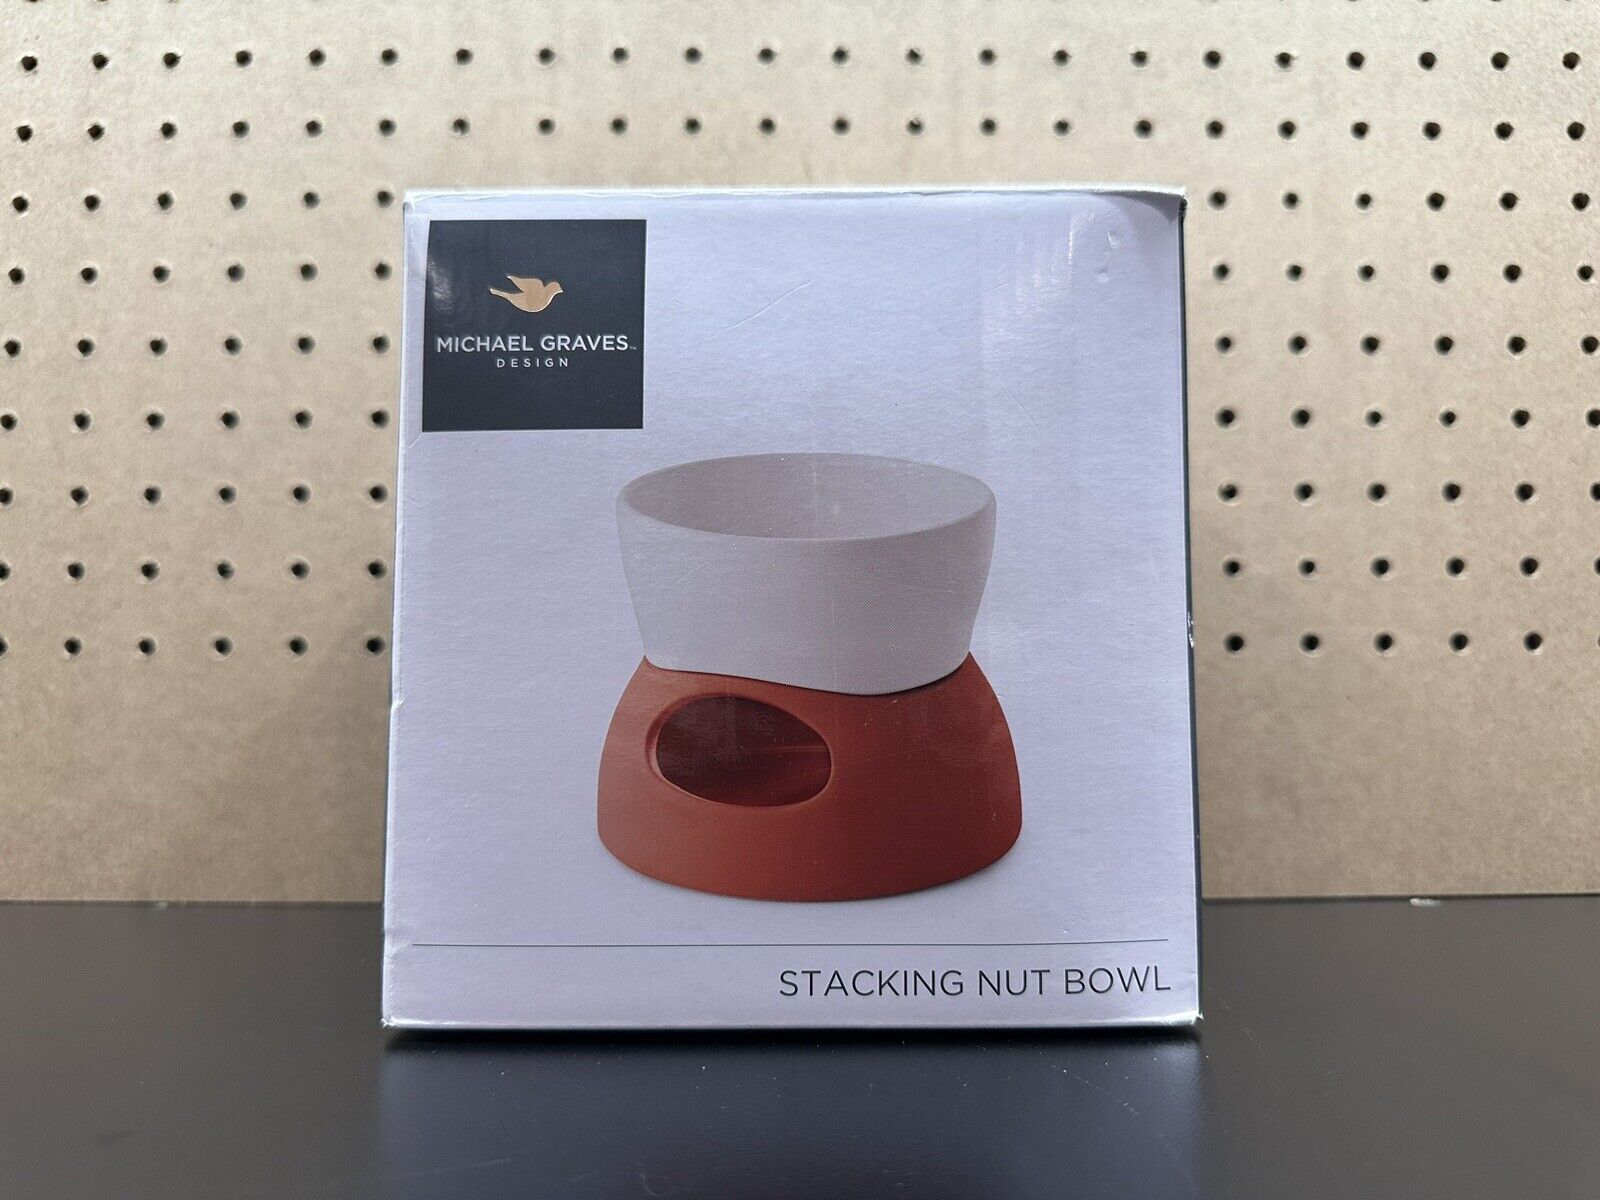 MICHAEL GRAVES DESIGN Stacking Nut Bowl or Fondue Bowl - New In Sealed Box